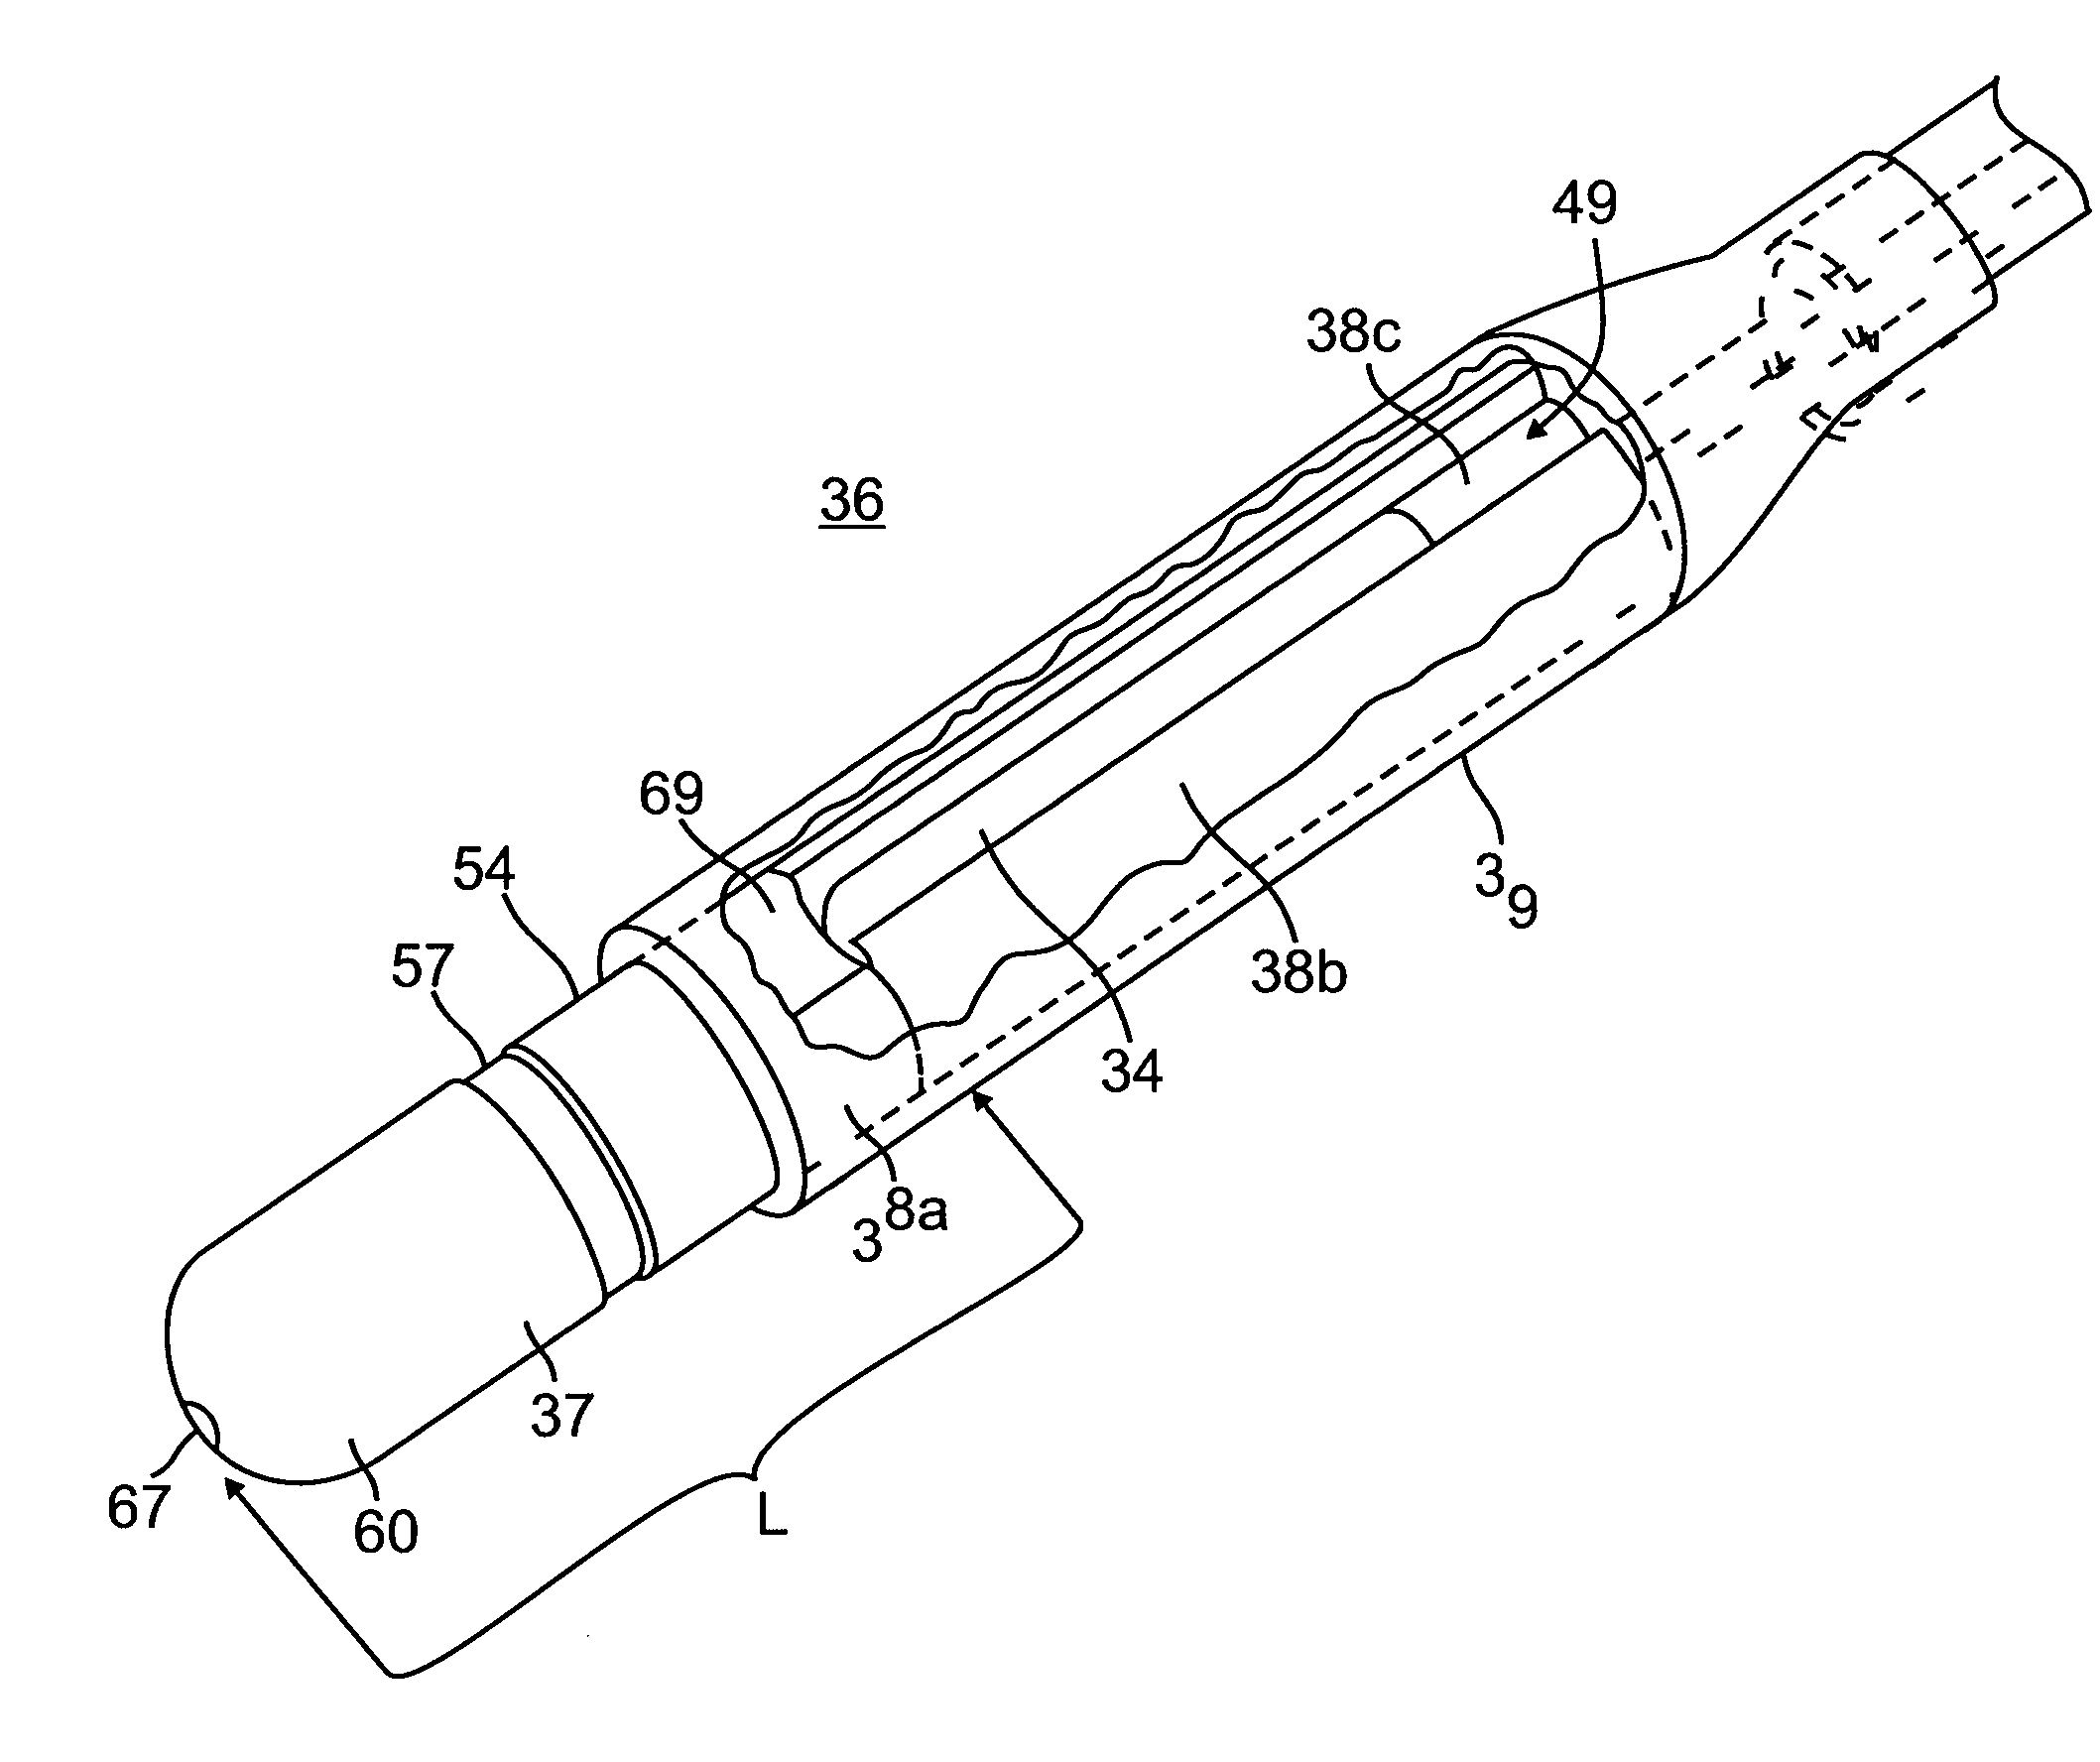 Magnetically guided catheter with concentric needle port